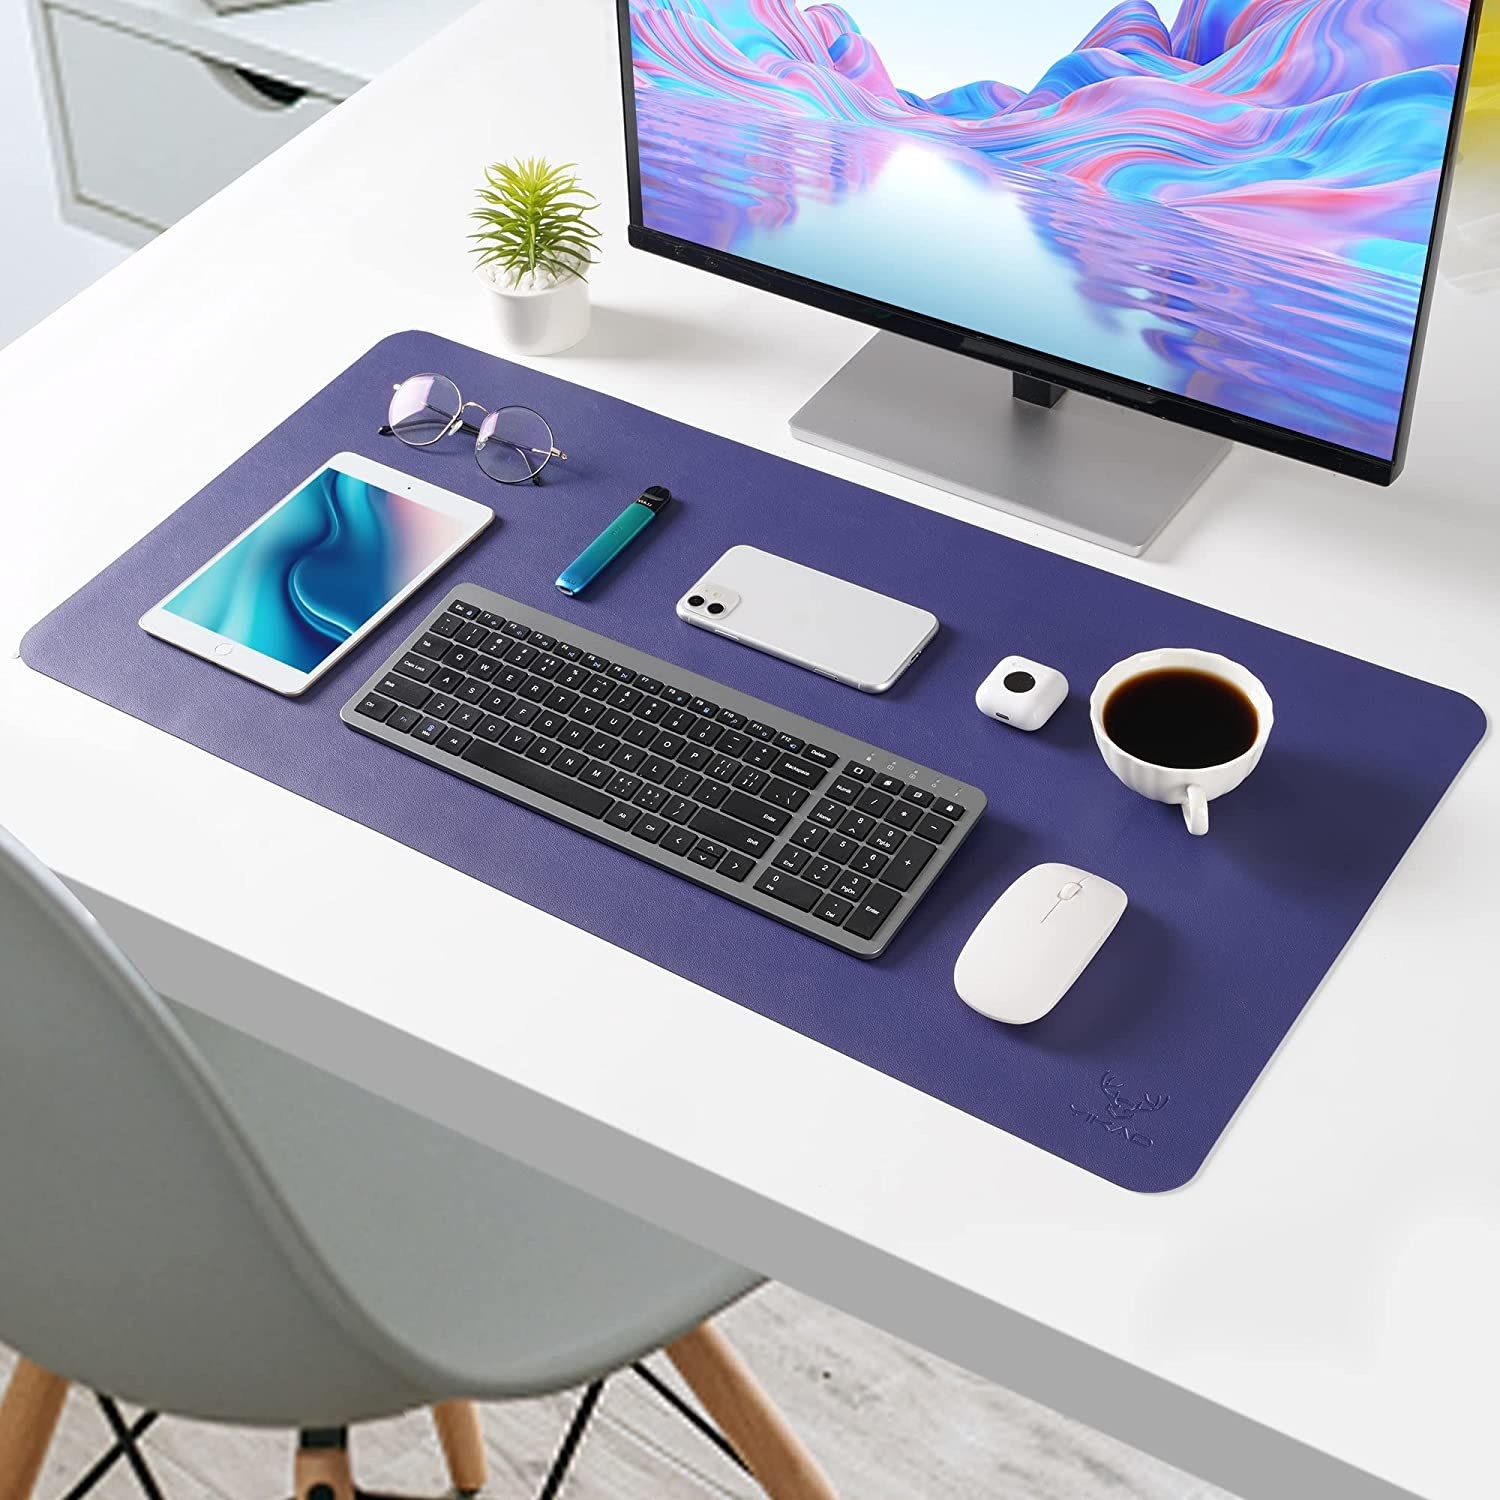 The desk pad with a several tech gadgets and a cup of coffee on it